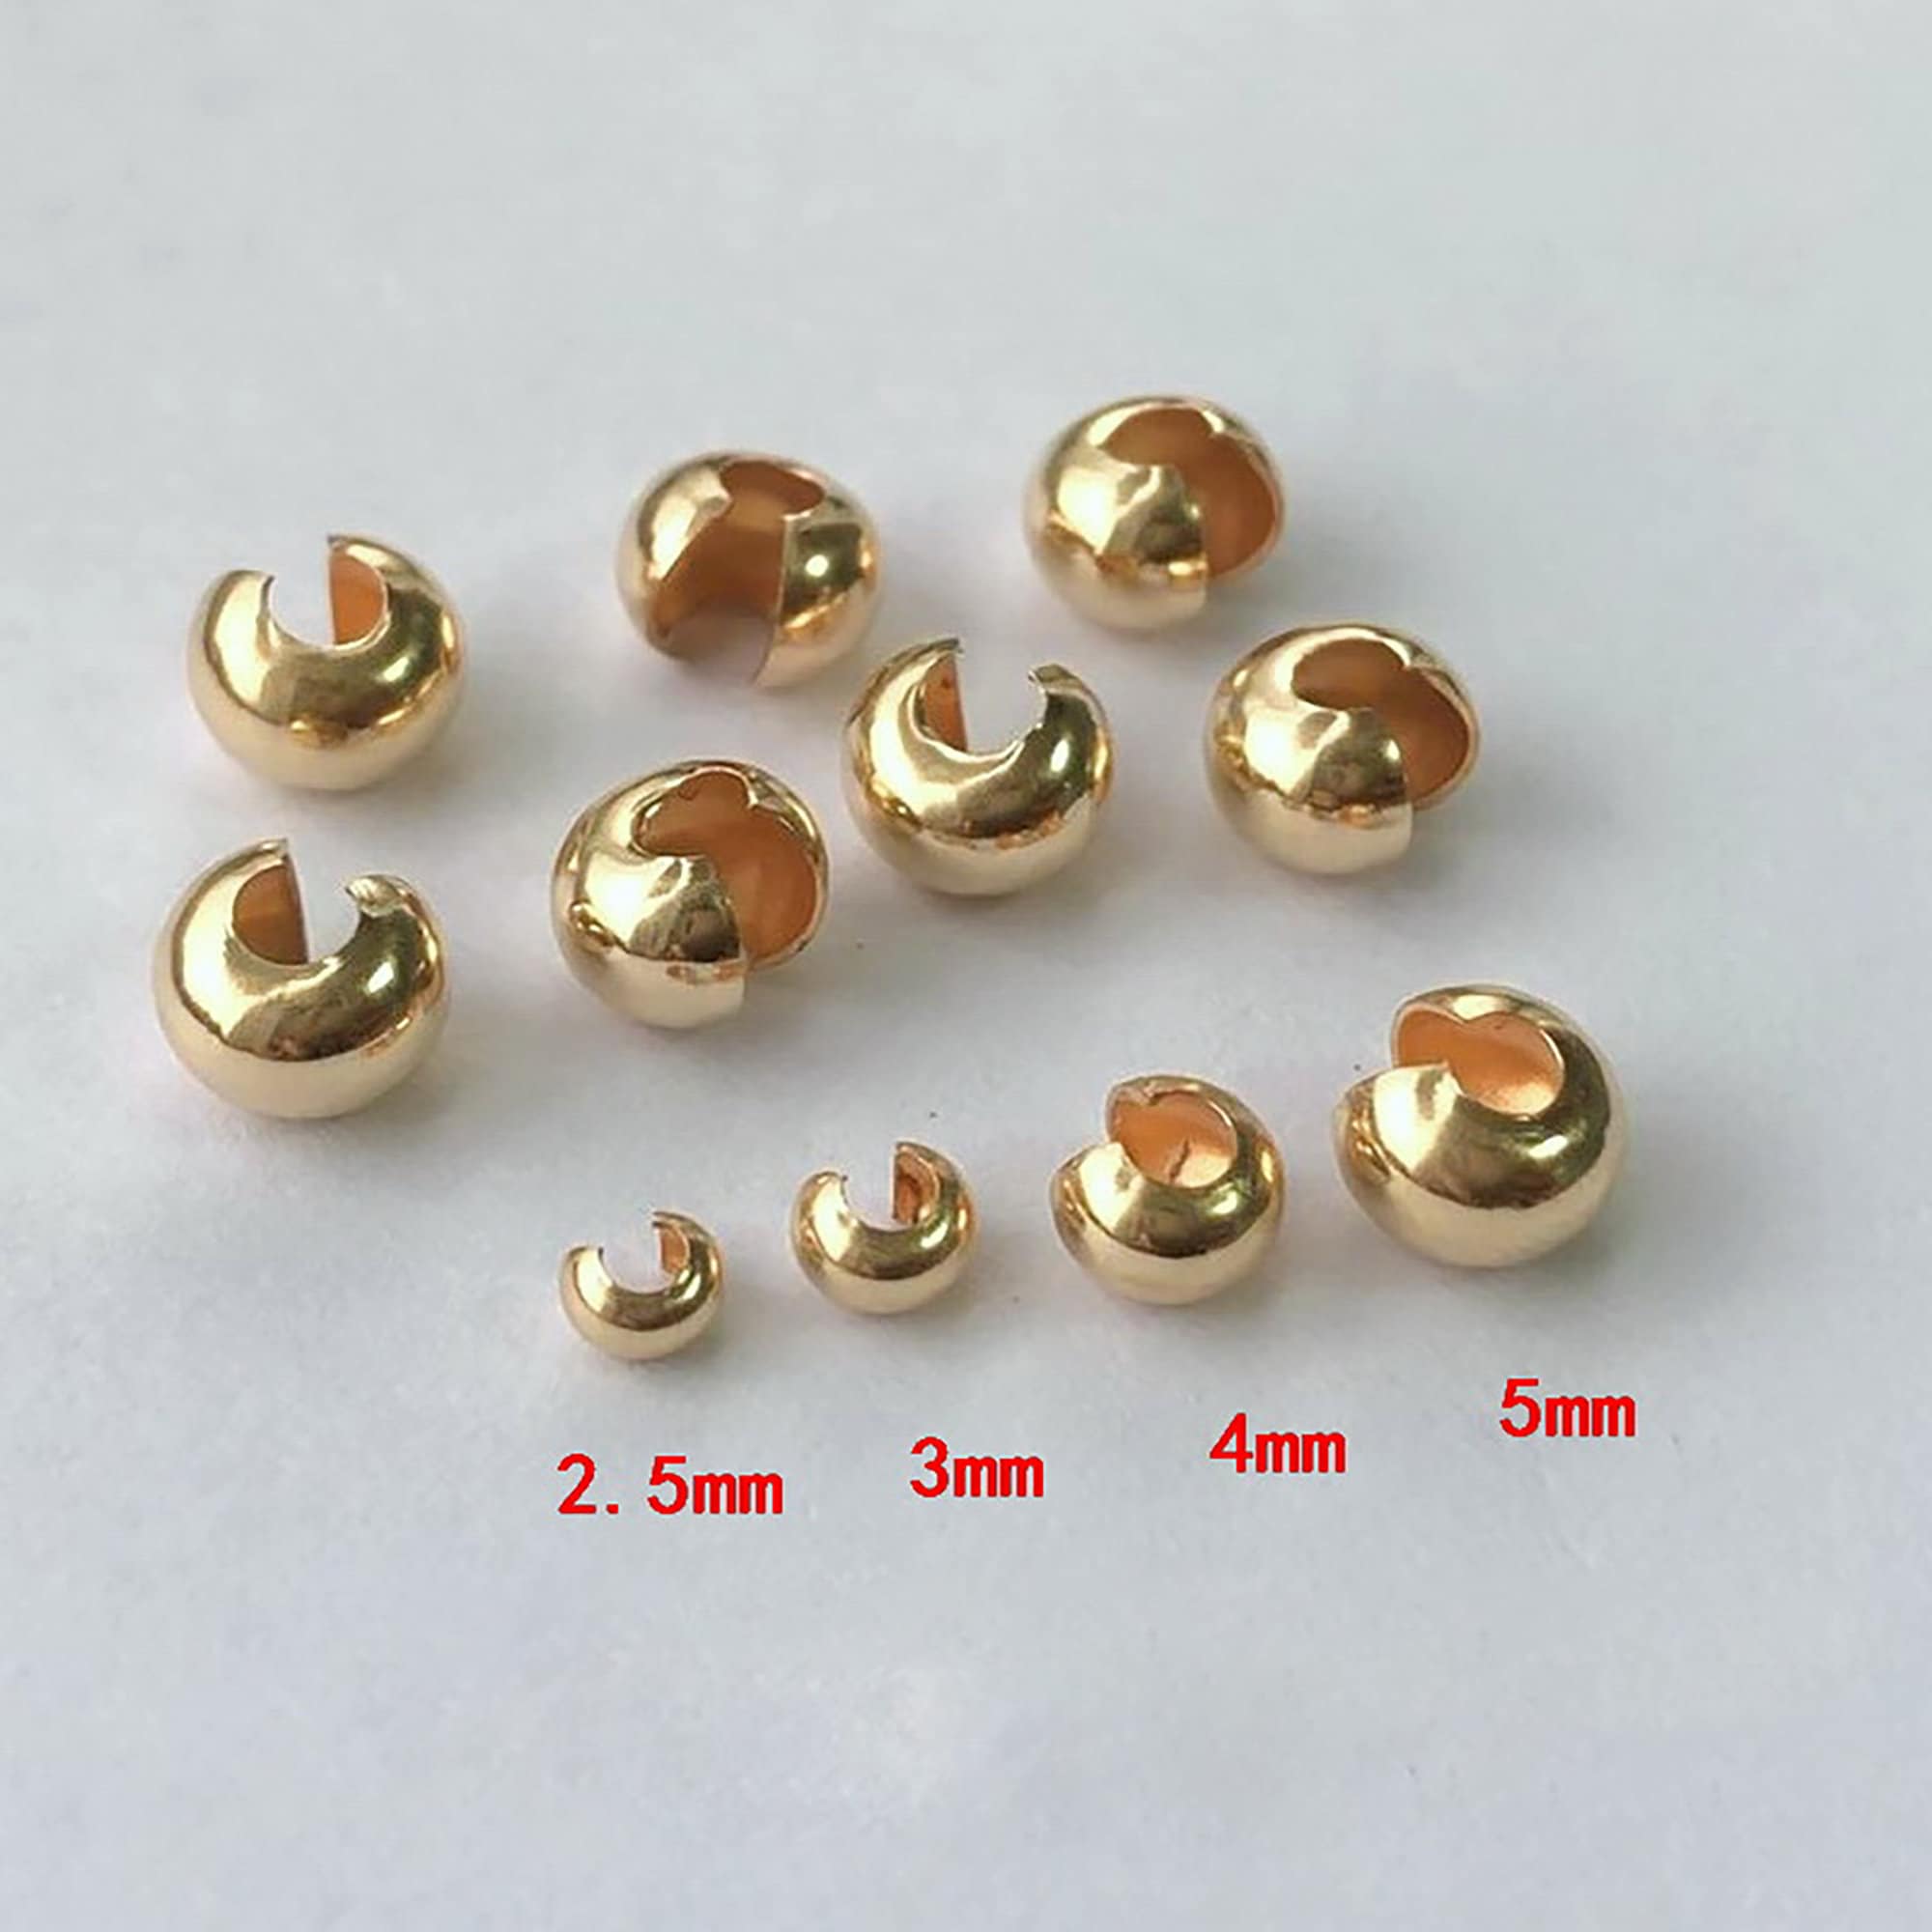 20pc 4x3.5mm Brass Crimp Bead Covers, Silver - Bead Box Bargains